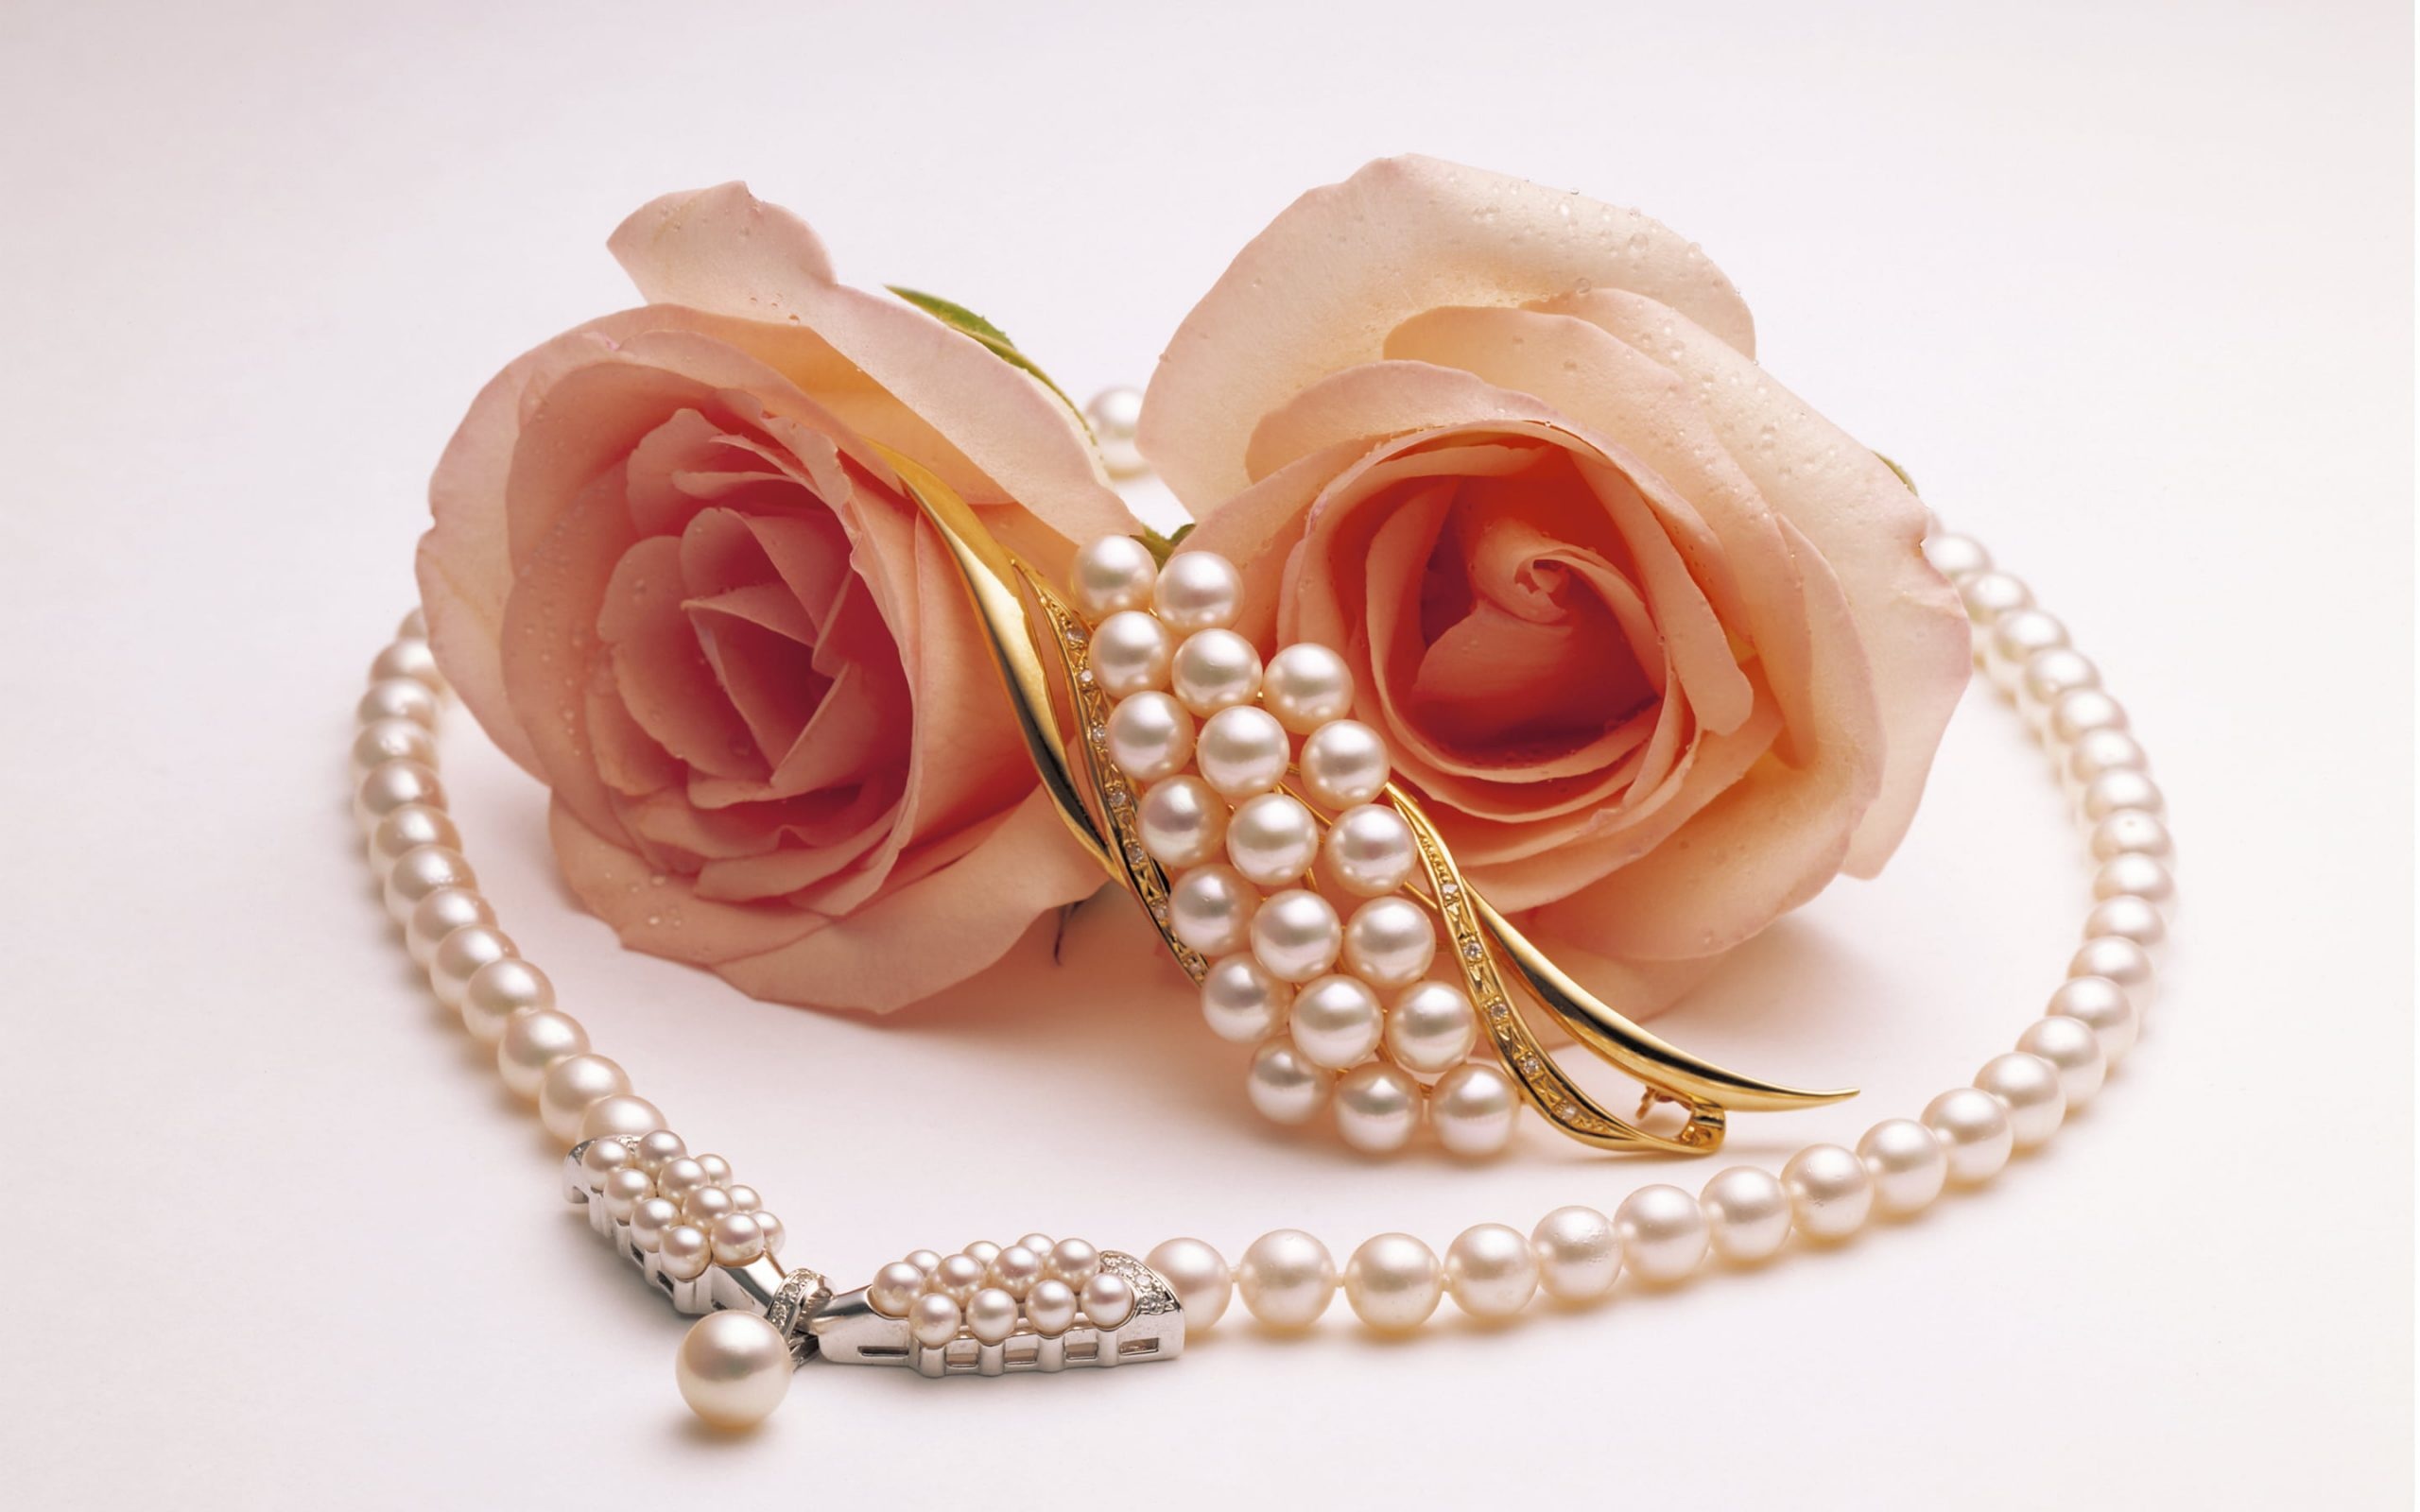 Gold colored jewelry, Pink roses, Pearl brooch, Fashionable wallpaper, 2560x1600 HD Desktop